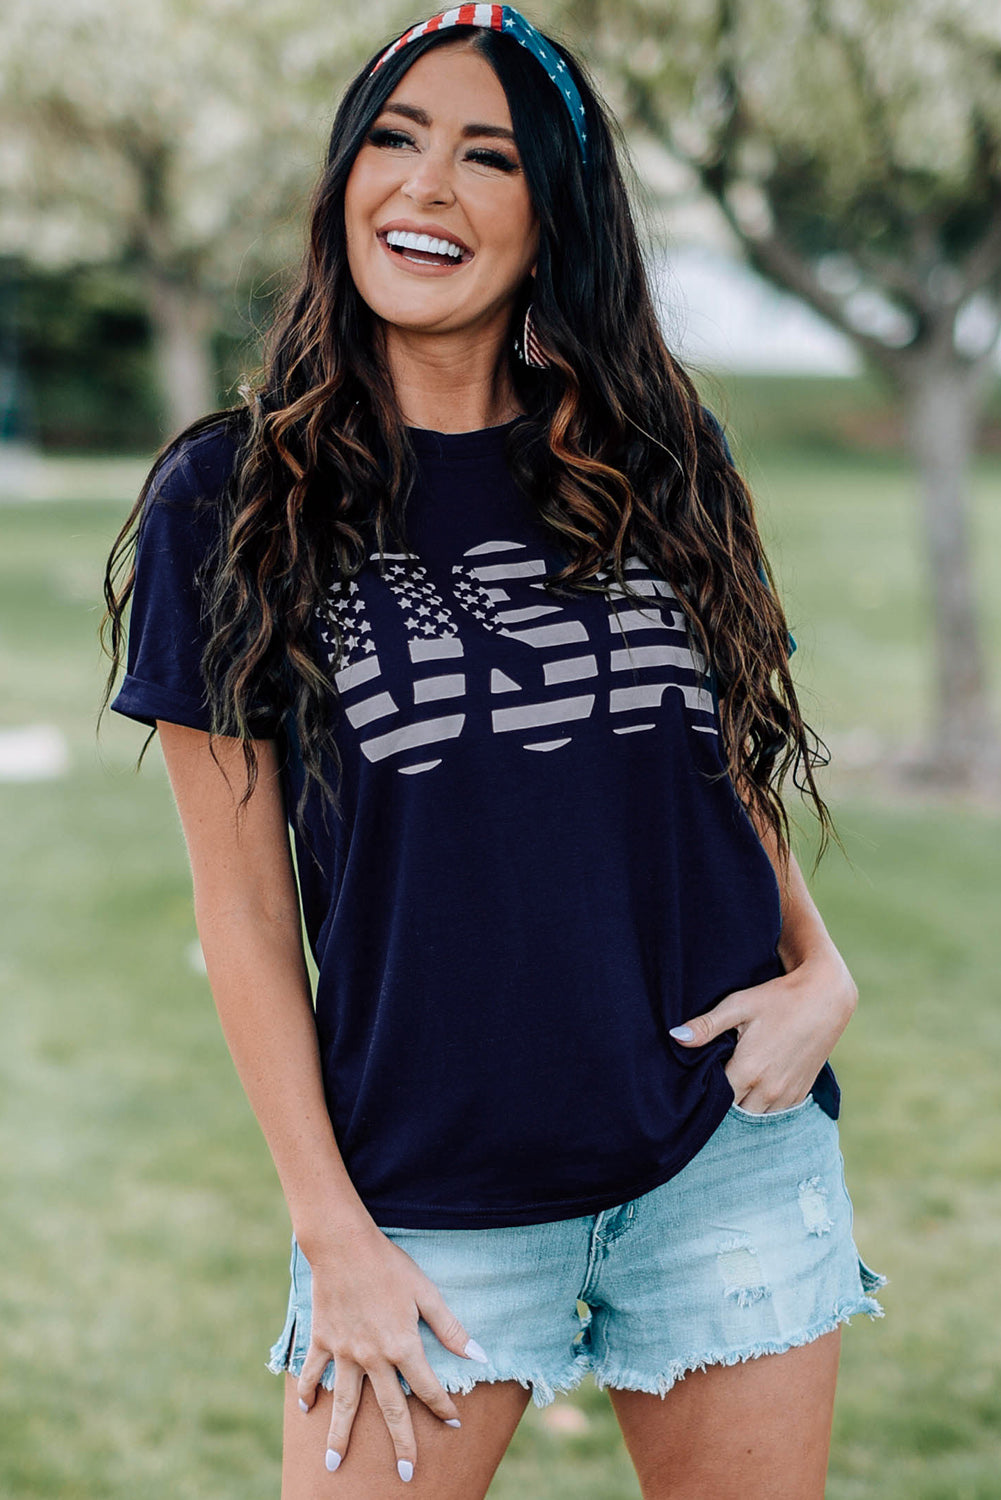 Blue USA Graphic Tee 4th of July Patriotic America T-Shirt for Women LC25216384-5